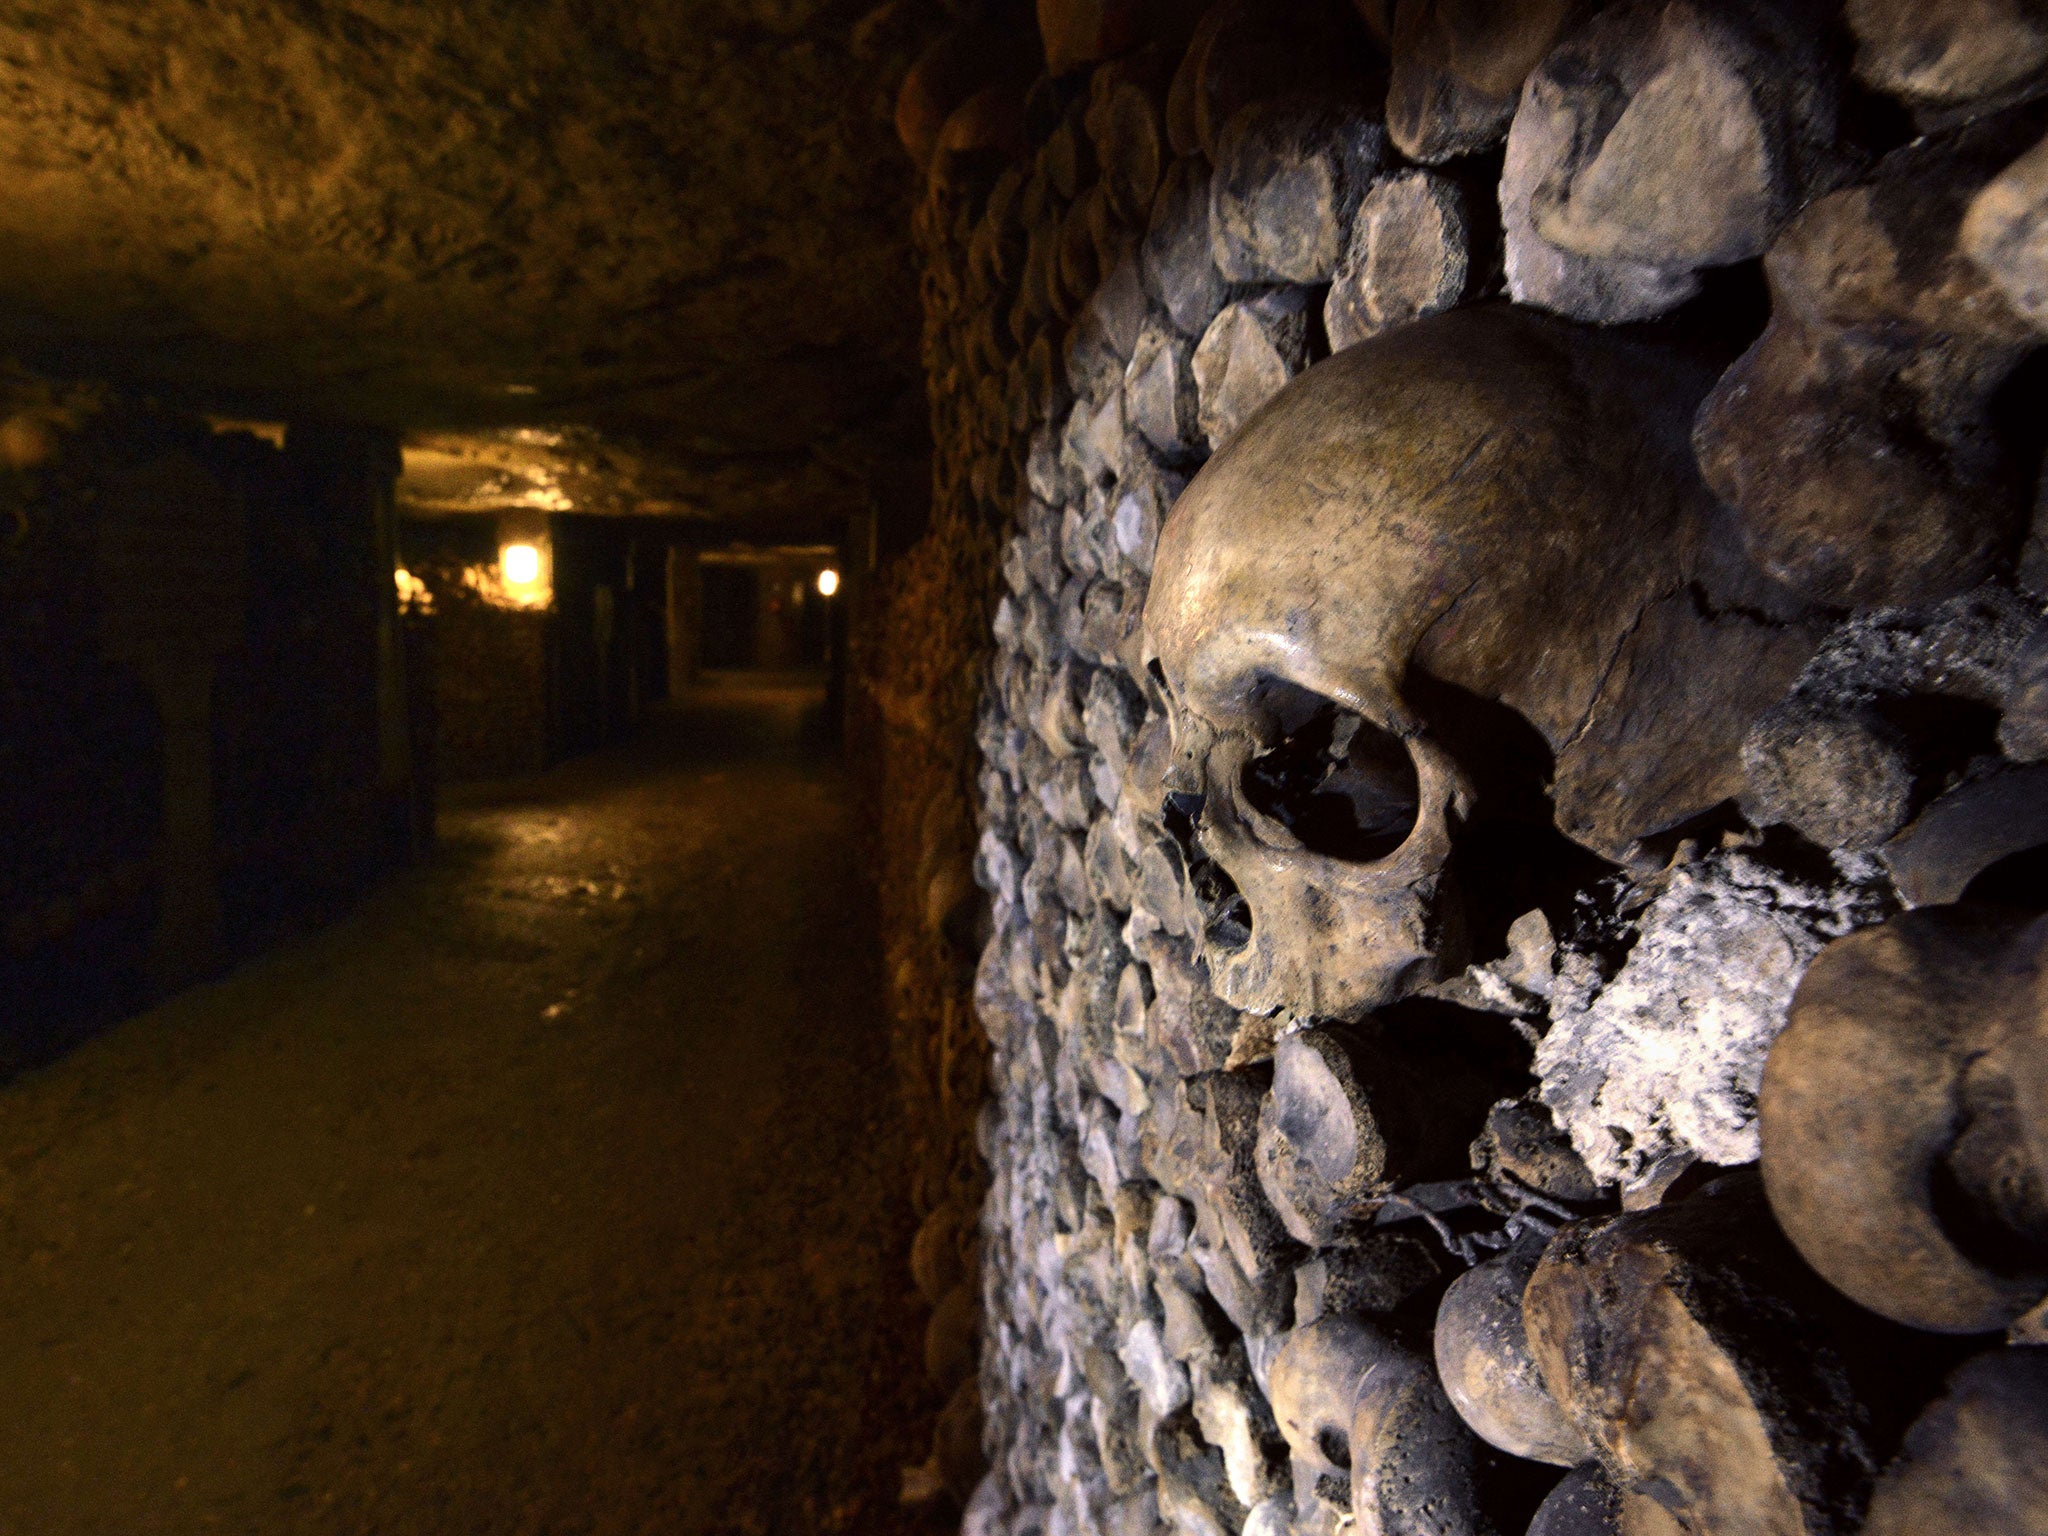 The winners will be sharing the catacombs with 6 million bodies.